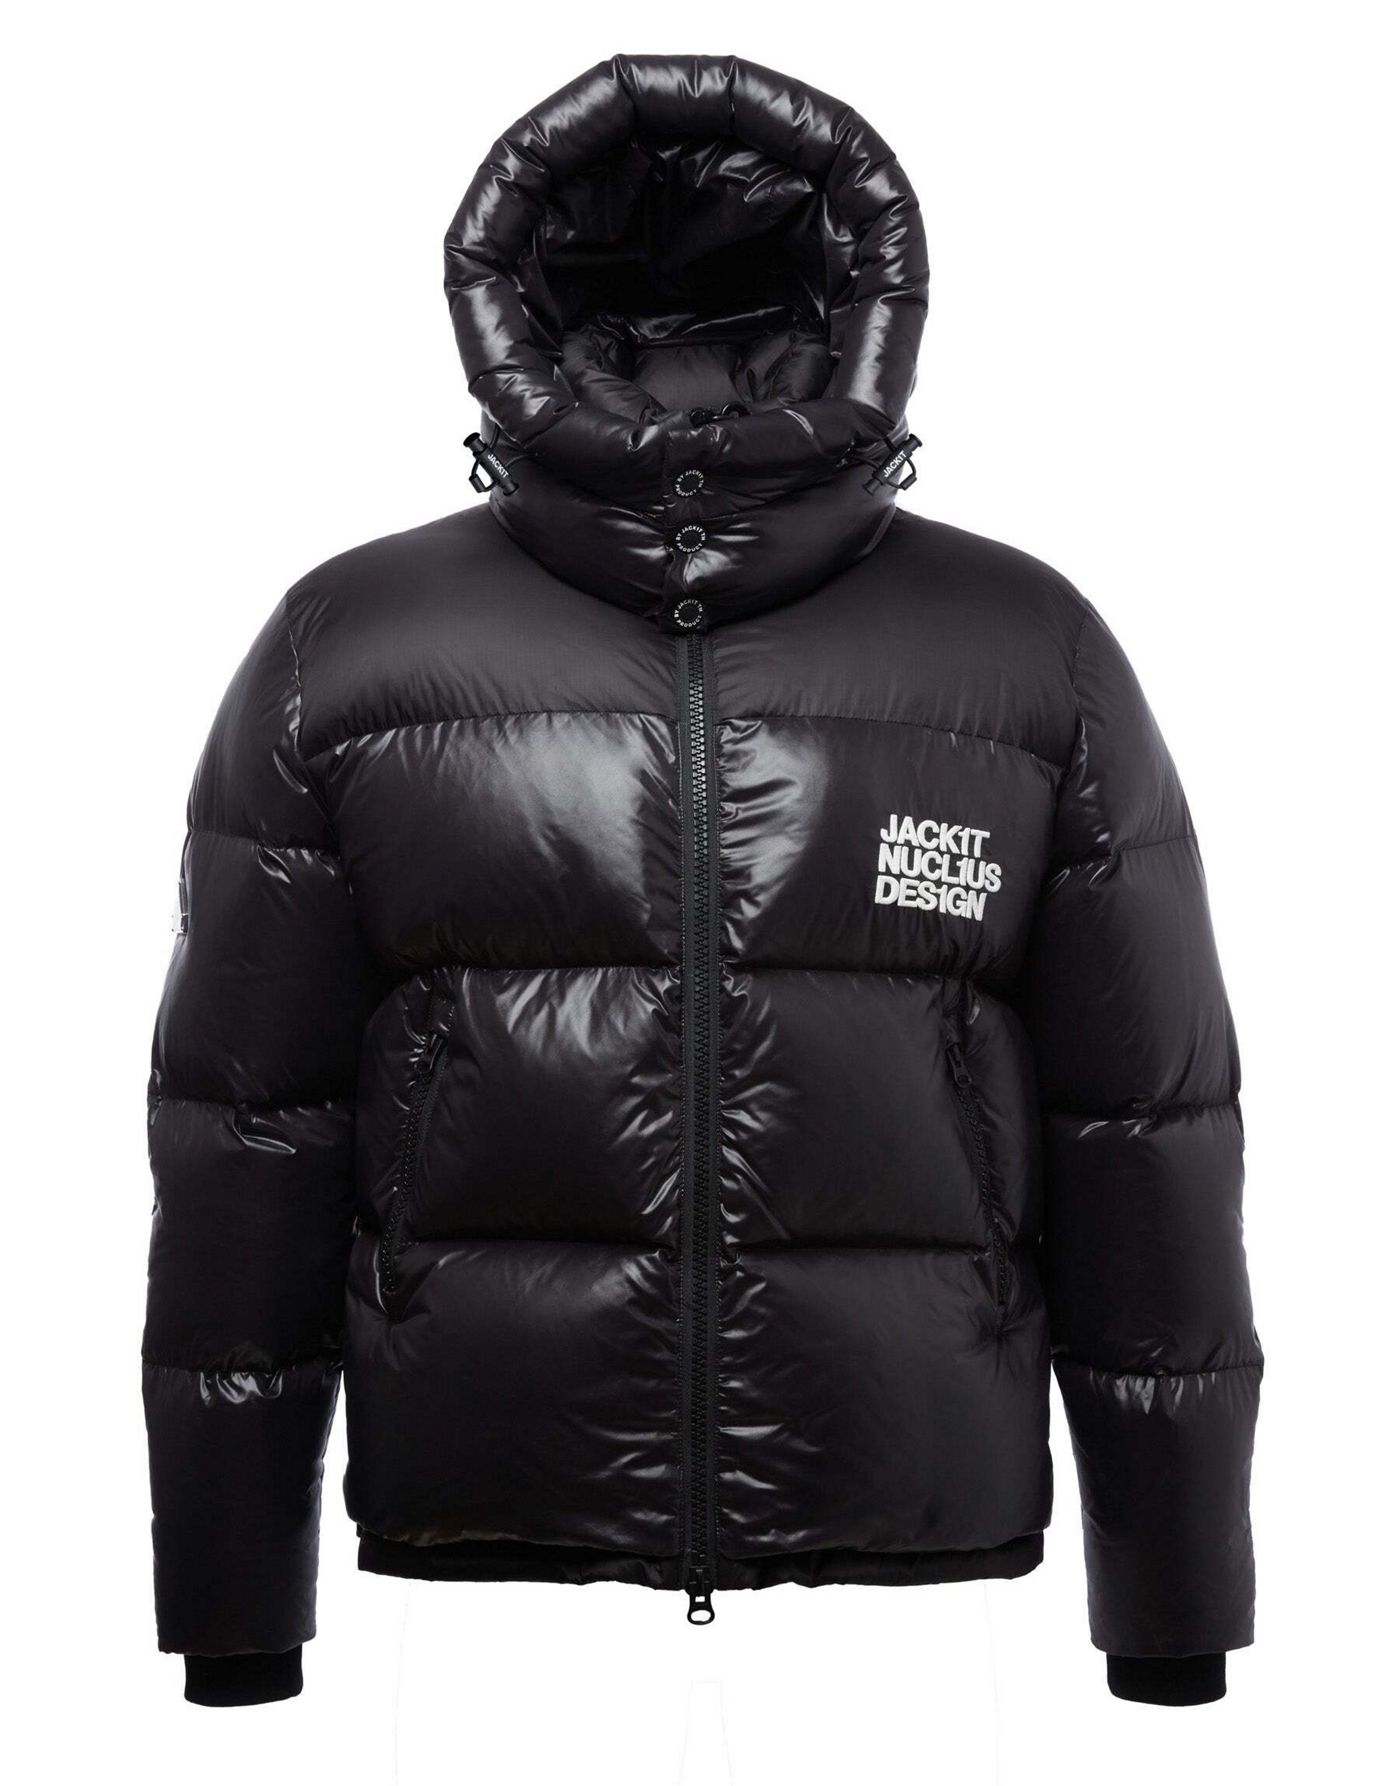 JACK1T expedition parka down coat in black and black